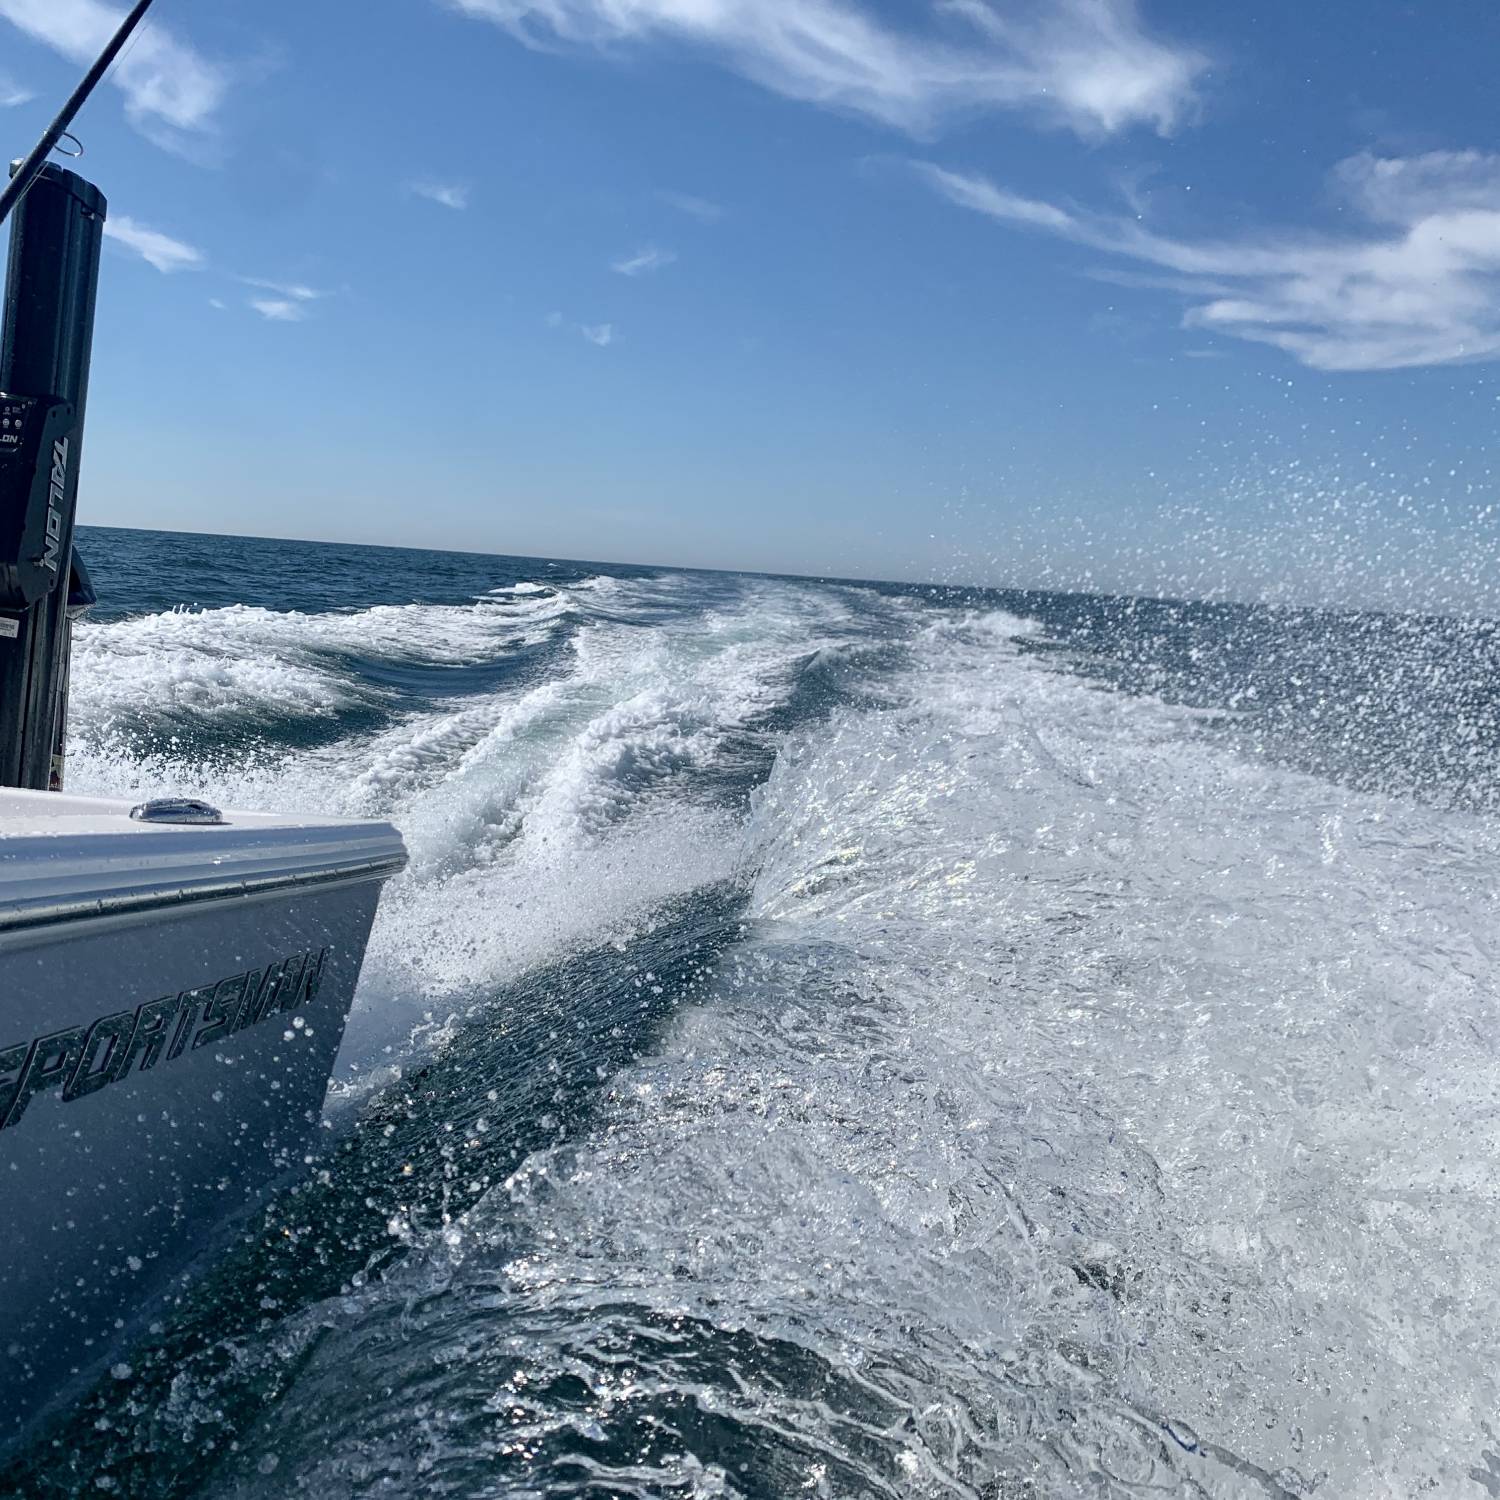 Title: Heading out to the deep - On board their Sportsman Masters 227 Bay Boat - Location: 50 miles out of OC MD inlet. Participating in the Photo Contest #SportsmanOctober2021